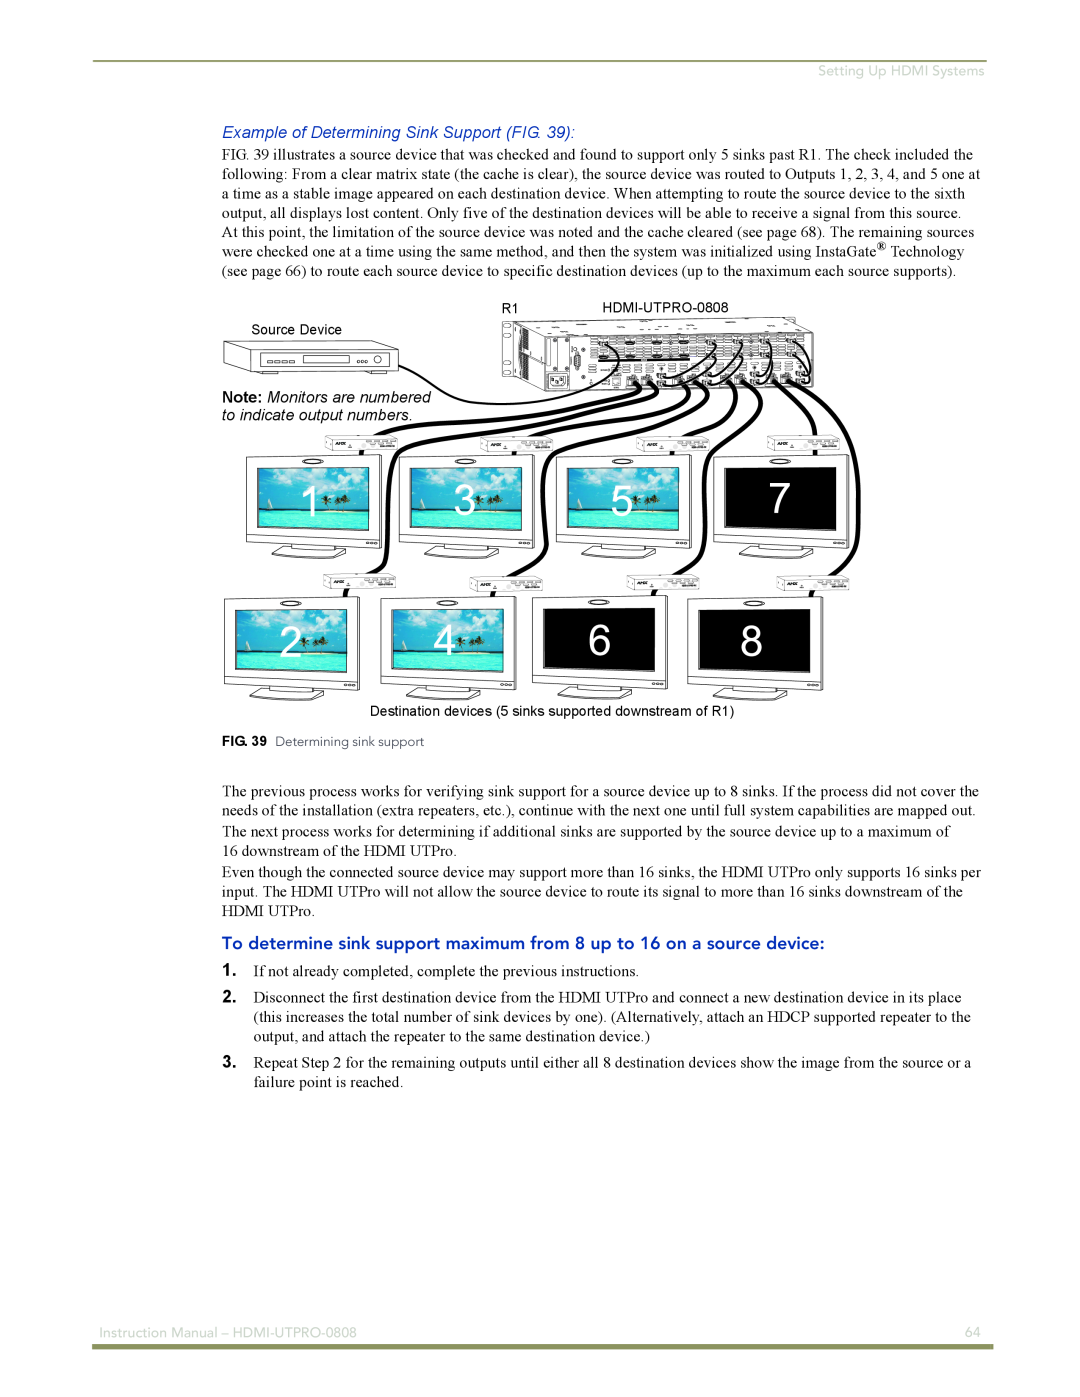 AMX Example of Determining Sink Support FIG, Setting Up HDMI Systems, Instruction Manual – HDMI-UTPRO-0808 